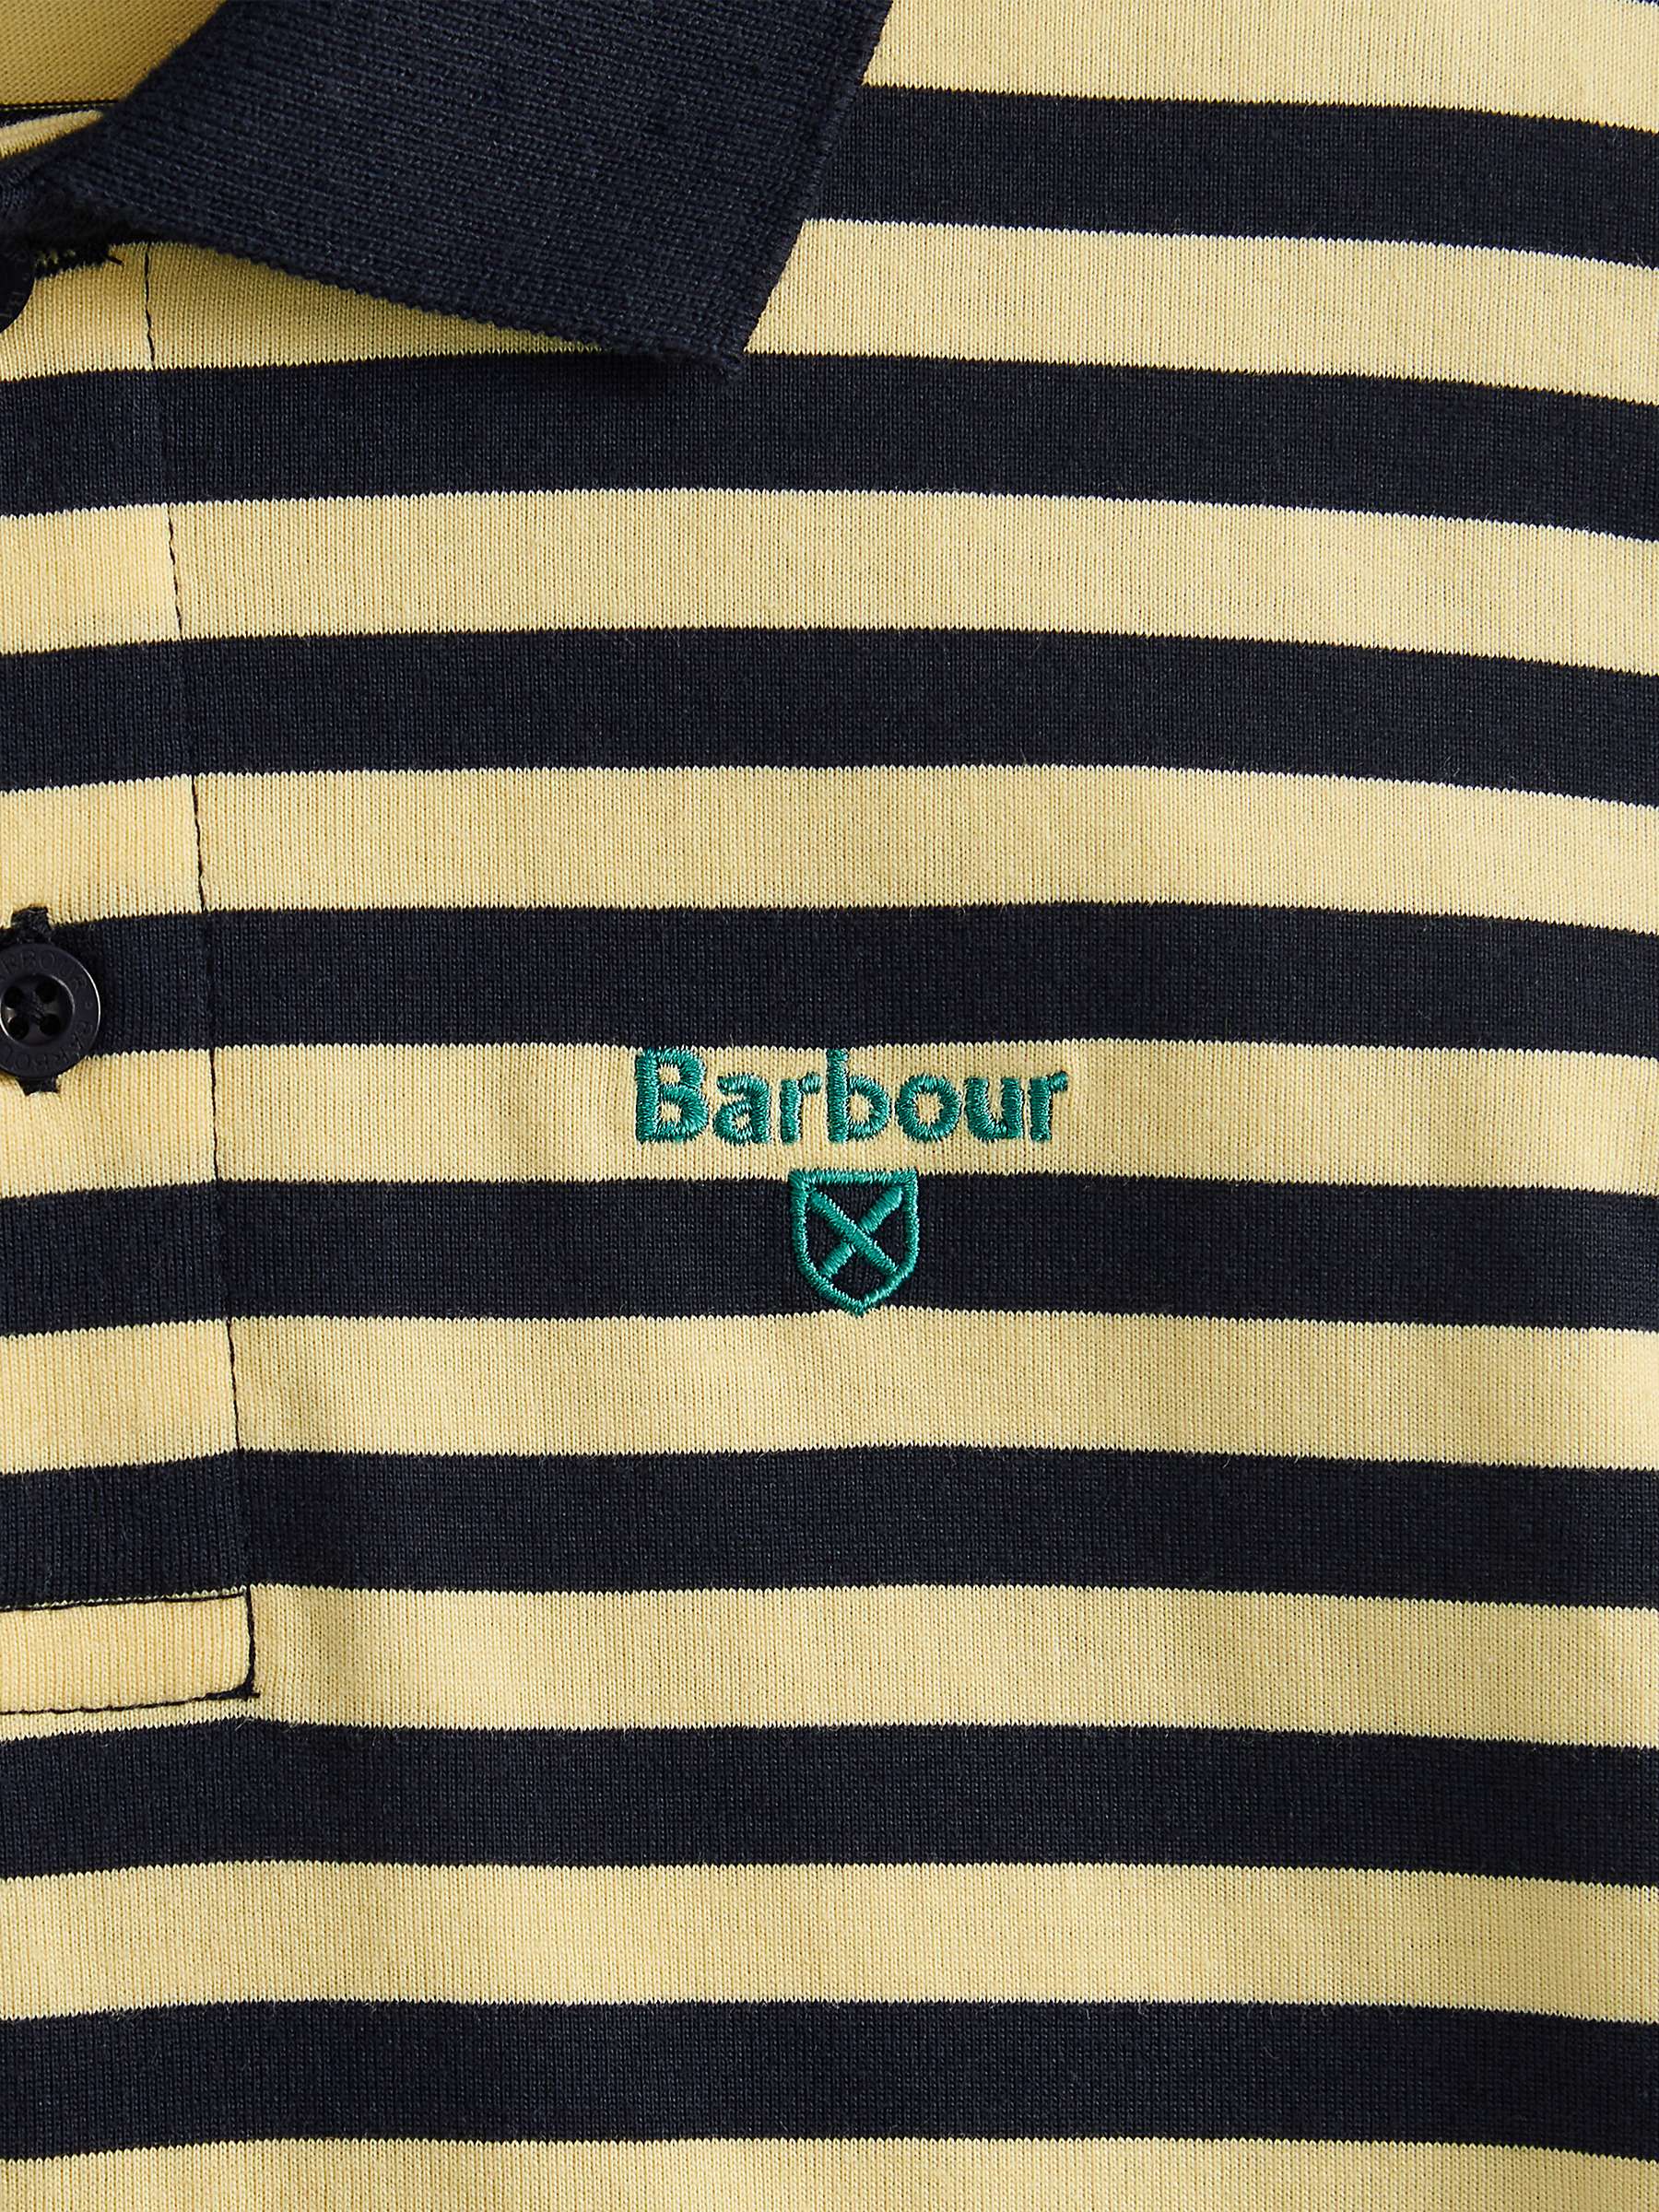 Buy Barbour Kids' Earle Stripe Polo Shirt, Yellow Online at johnlewis.com